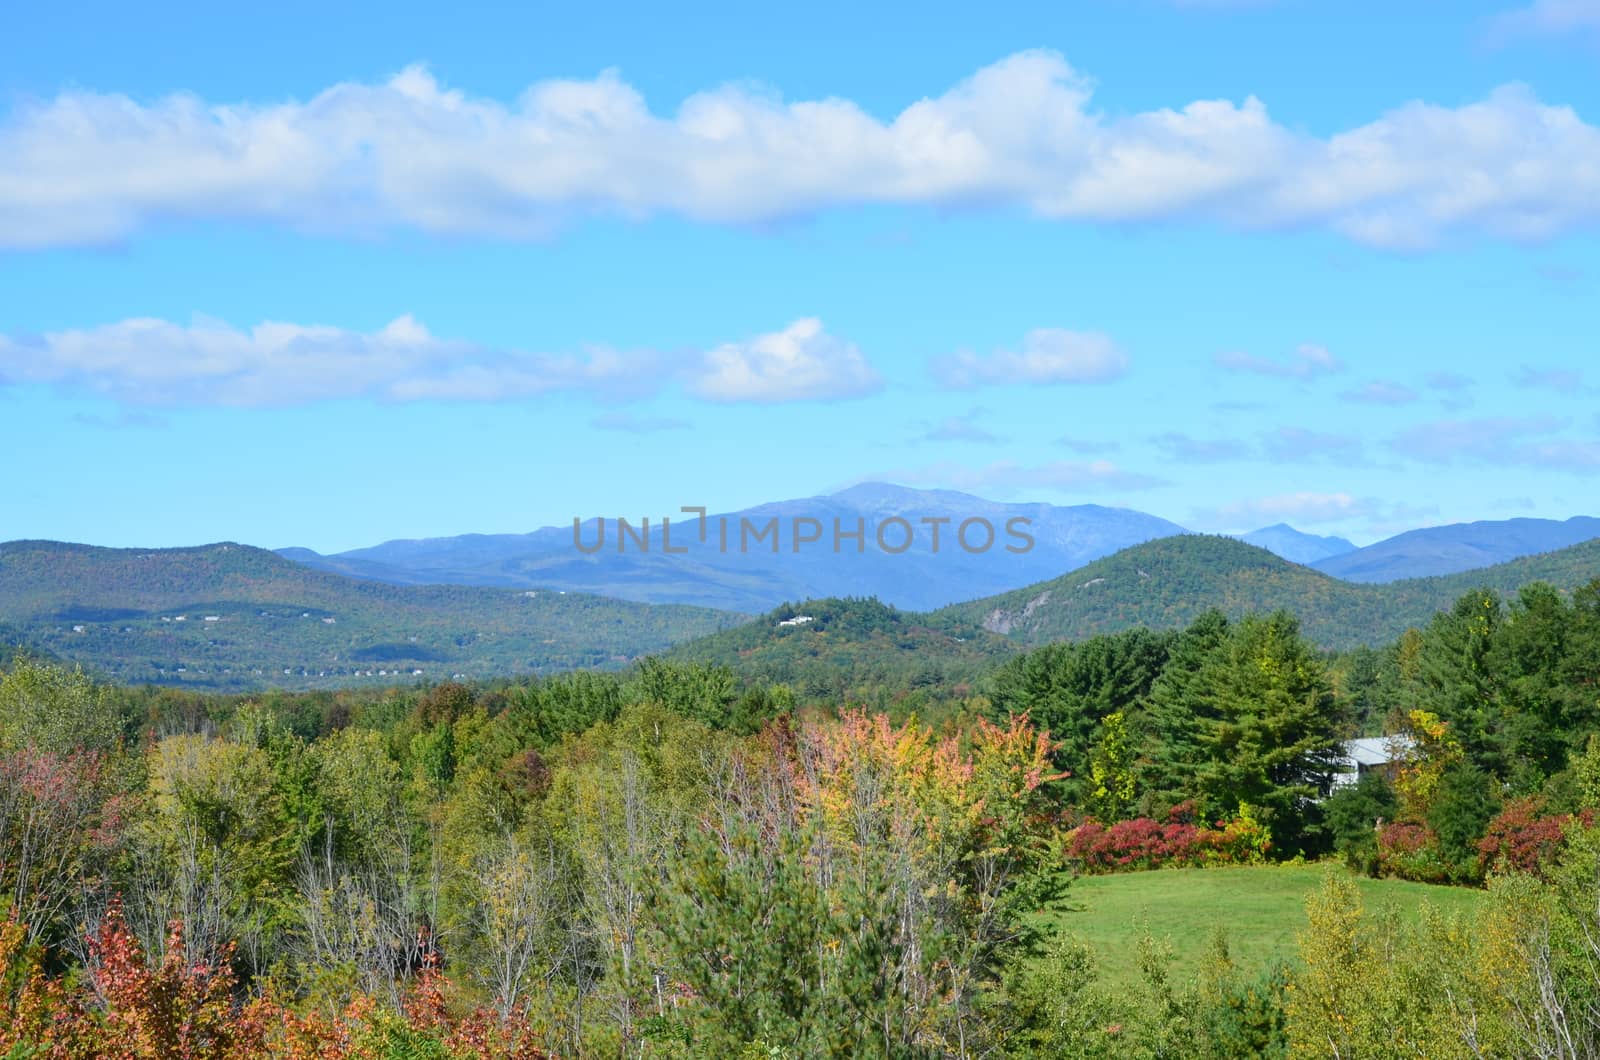 Early fall in the mountains of New Hampshire.